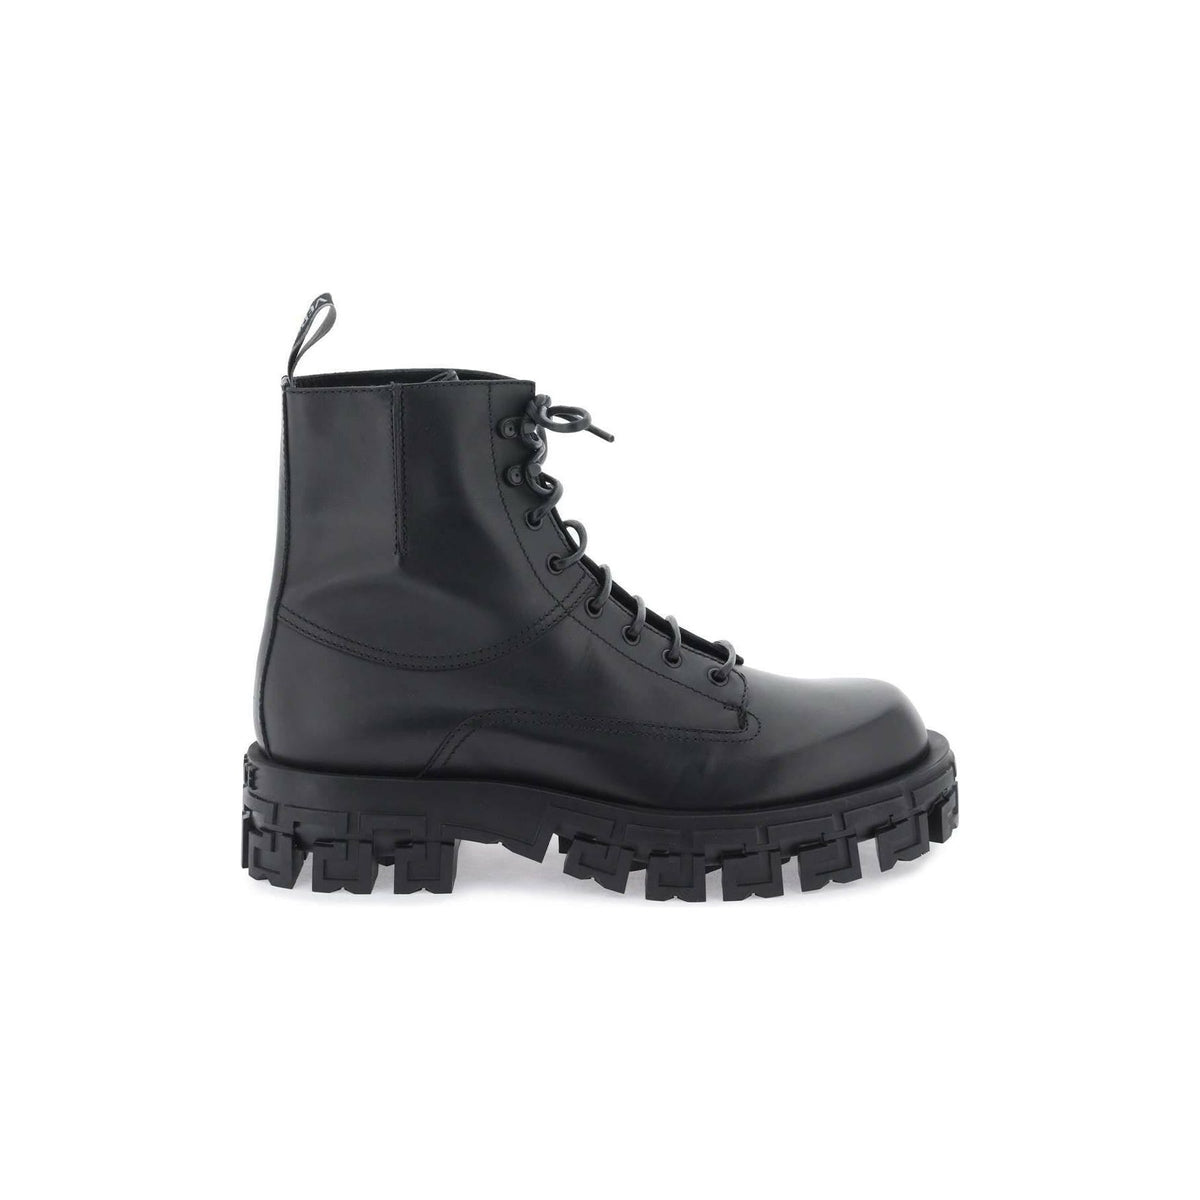 VERSACE - Black Smooth Leather Greca Portico Combat Boots With Waxed Laces - JOHN JULIA